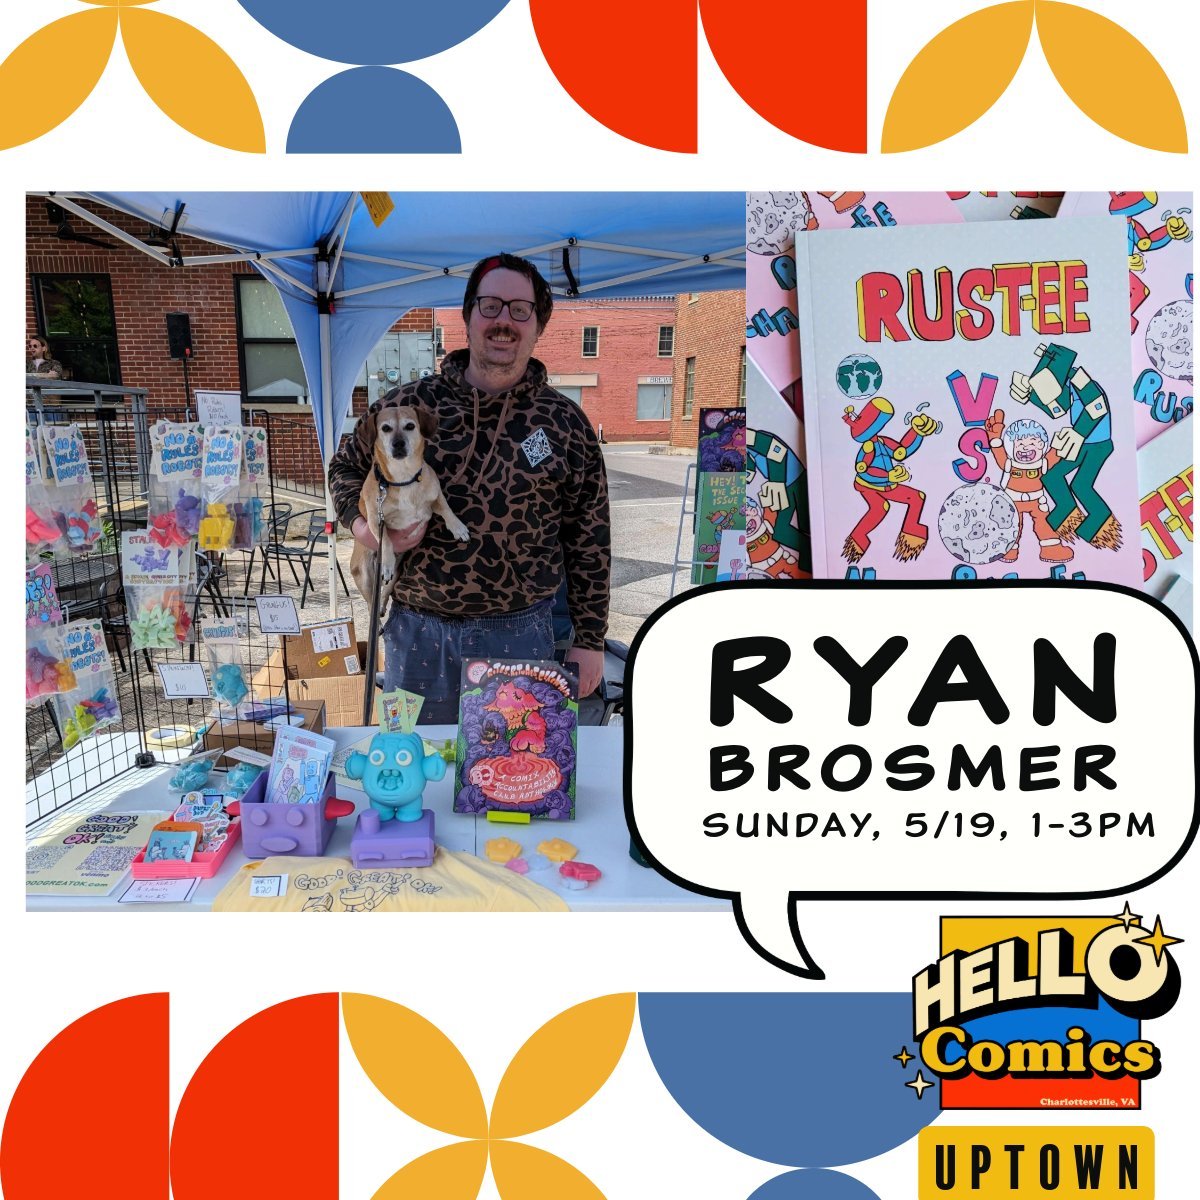 Ryan Brosmer is coming to Uptown! He'll be selling/signing his new book Rustee and talking about comics, toy-making, and the upcoming Staunton Underground Comics and Zine Fest @sucz_fest.  Sunday May 19, 1-3pm.